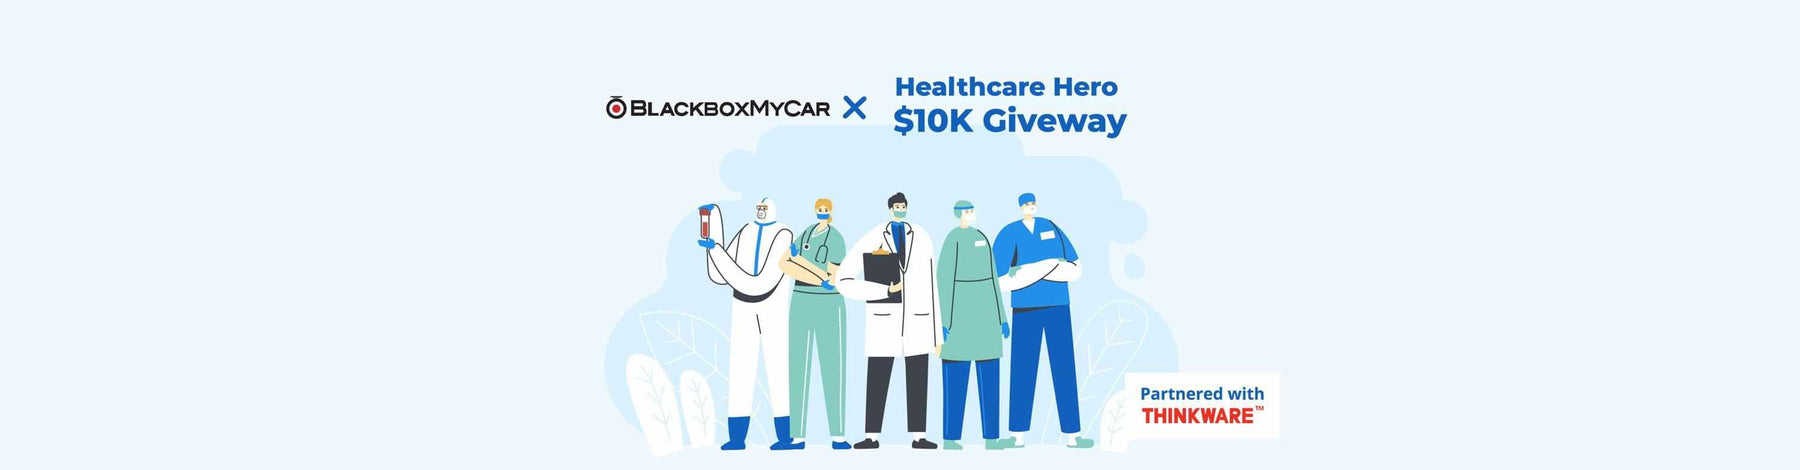 BlackboxMyCar | Helping Out In the Community - $10K Healthcare Heroes Giveaway -  - BlackboxMyCar Canada